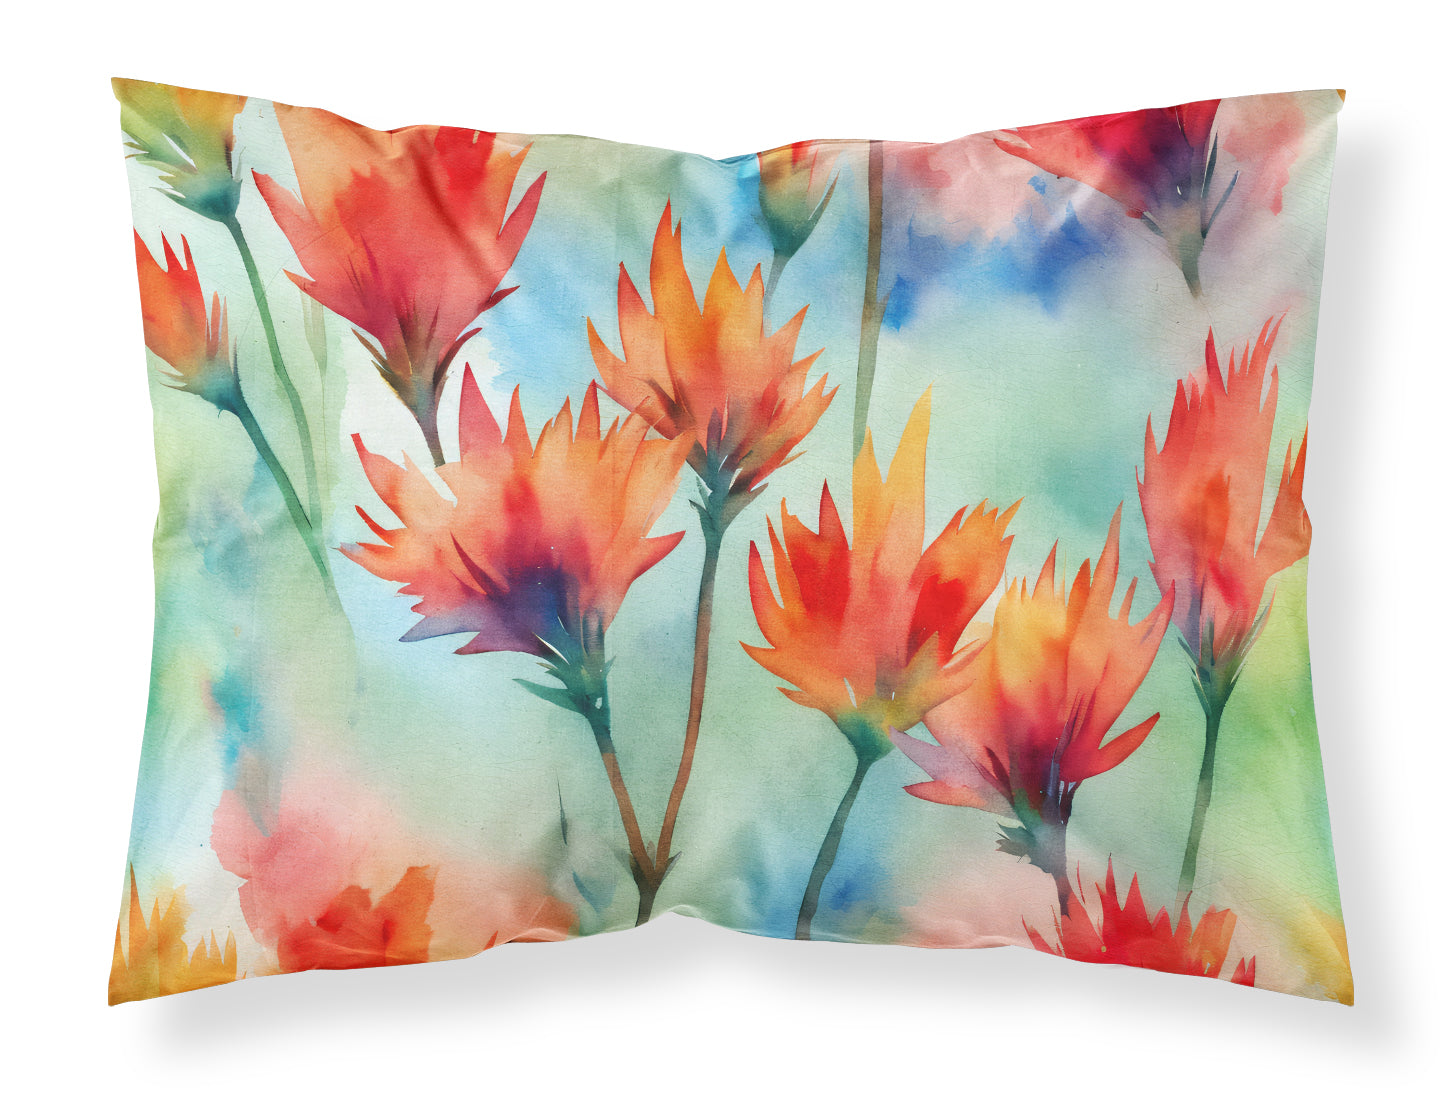 Buy this Wyoming Indian Paintbrush in Watercolor Fabric Standard Pillowcase